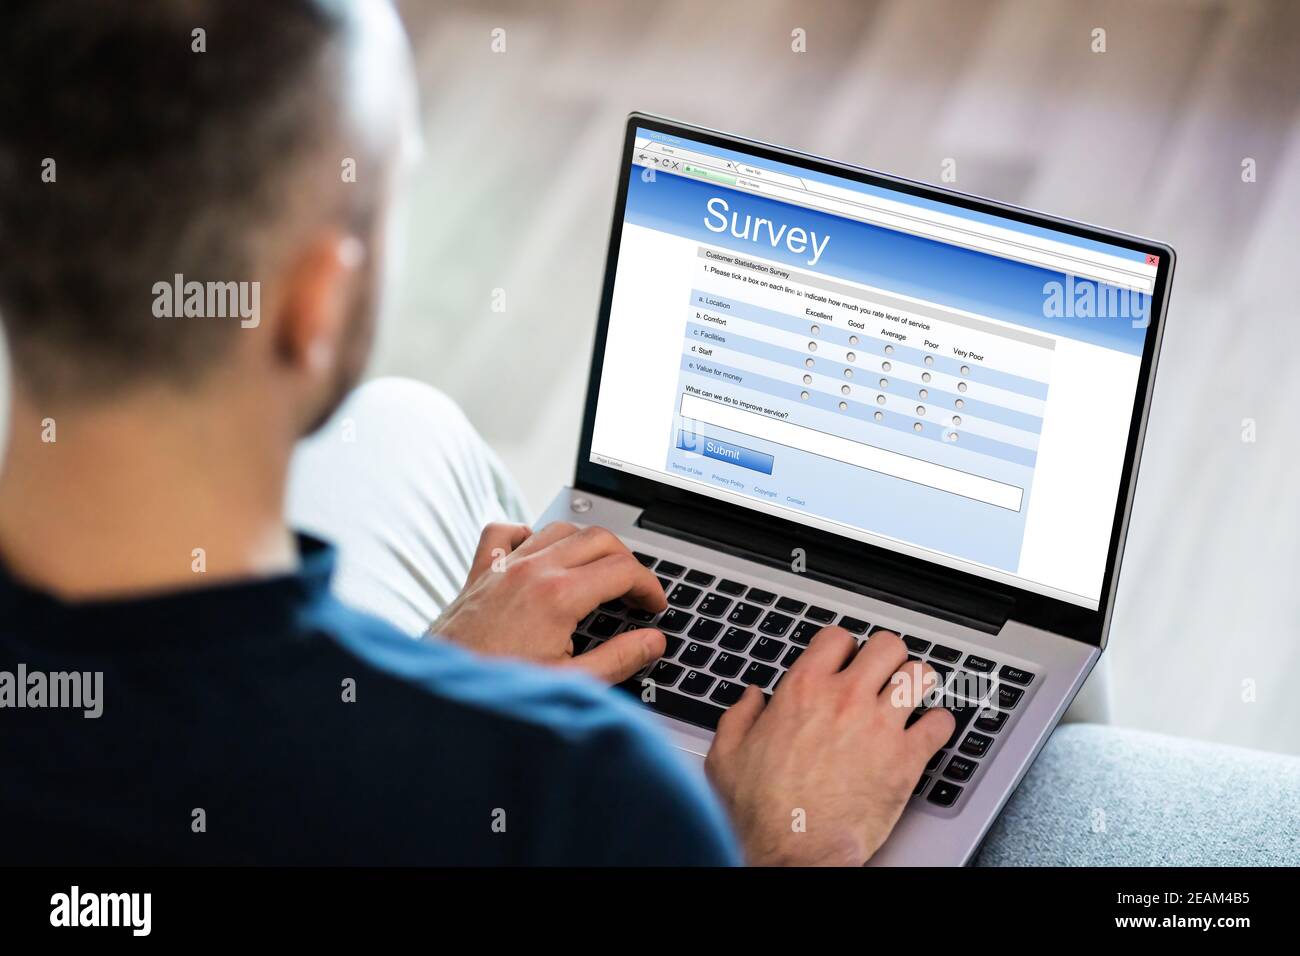 Survey Questionnaire Or Poll On Laptop Computer Stock Photo